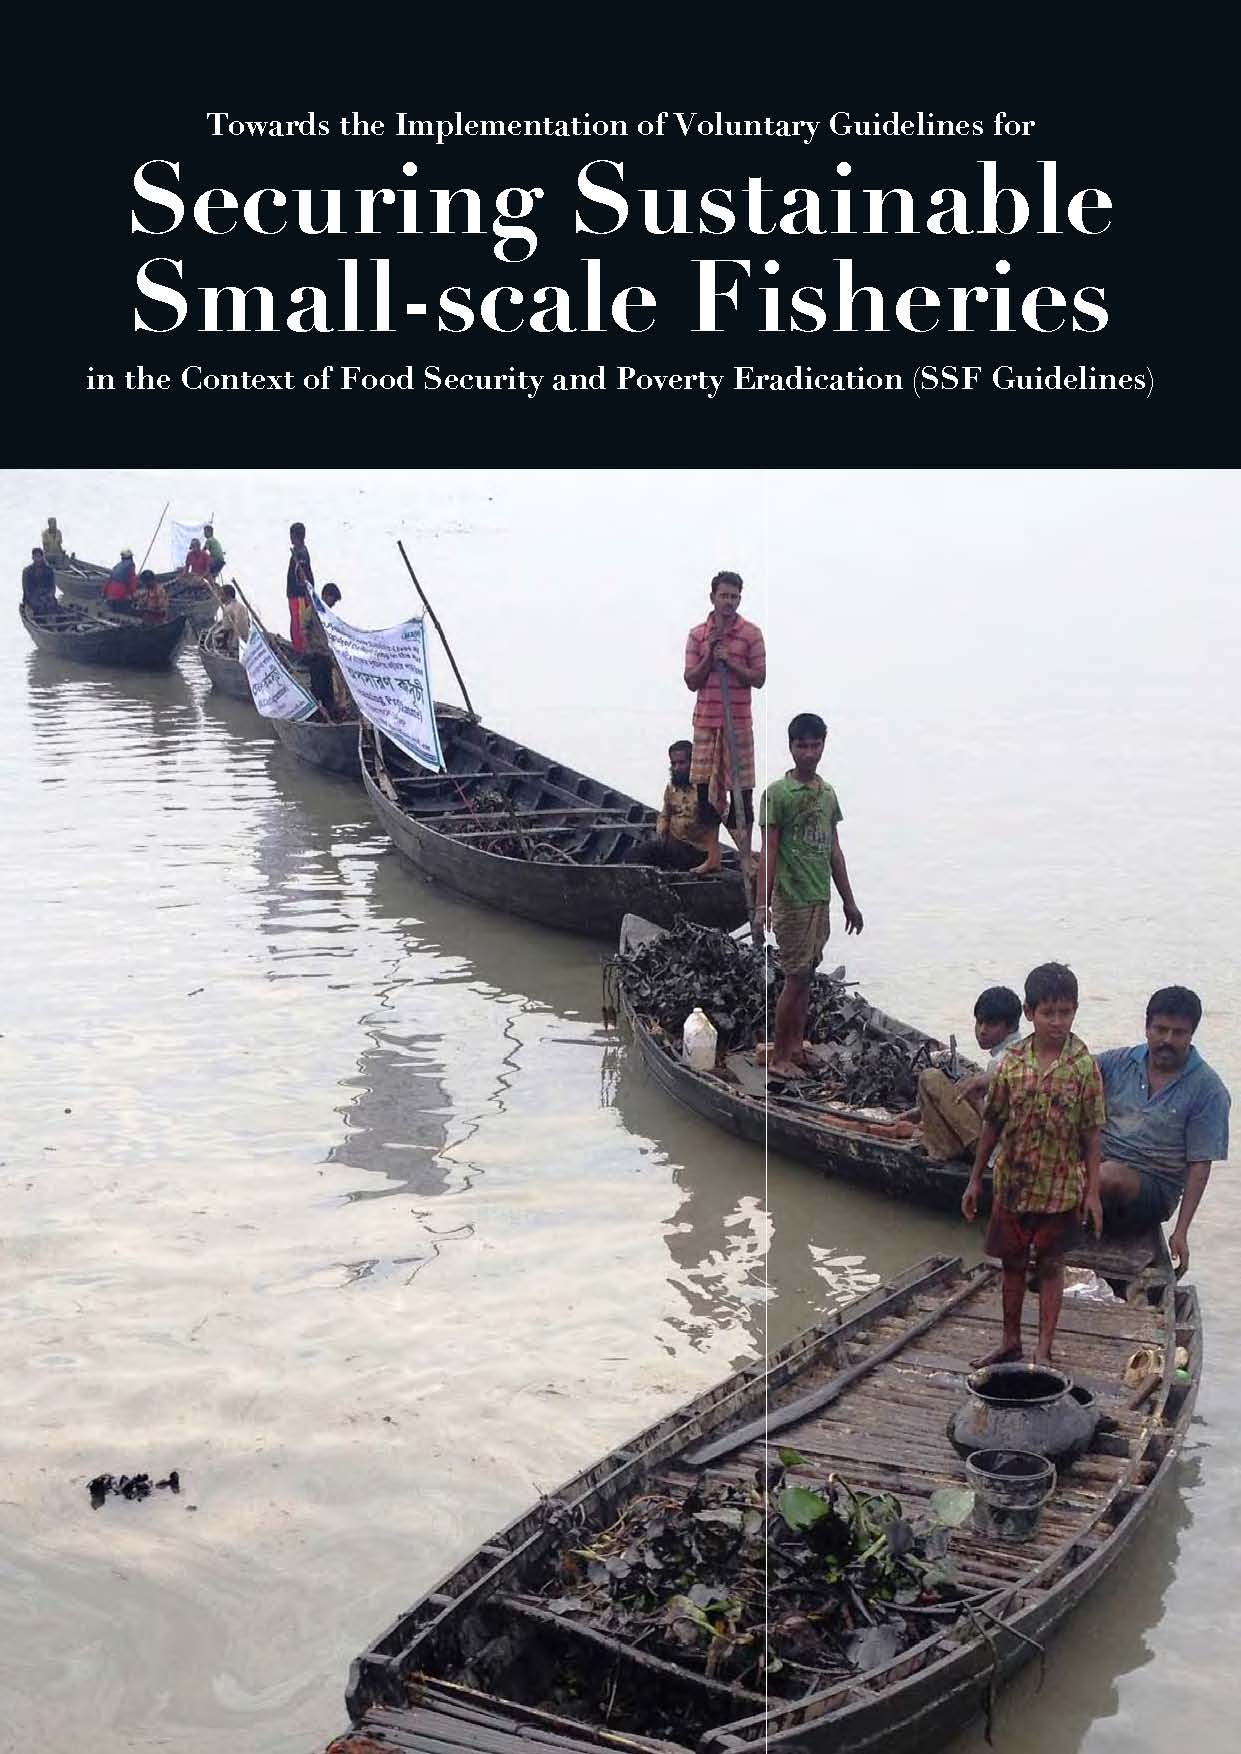 Implementation of SSF Guidelines: Towards the implementation of the Voluntary Guidelines for Securing Sustainable Small-scale Fisheries in the context of Food Security and Poverty Eradication